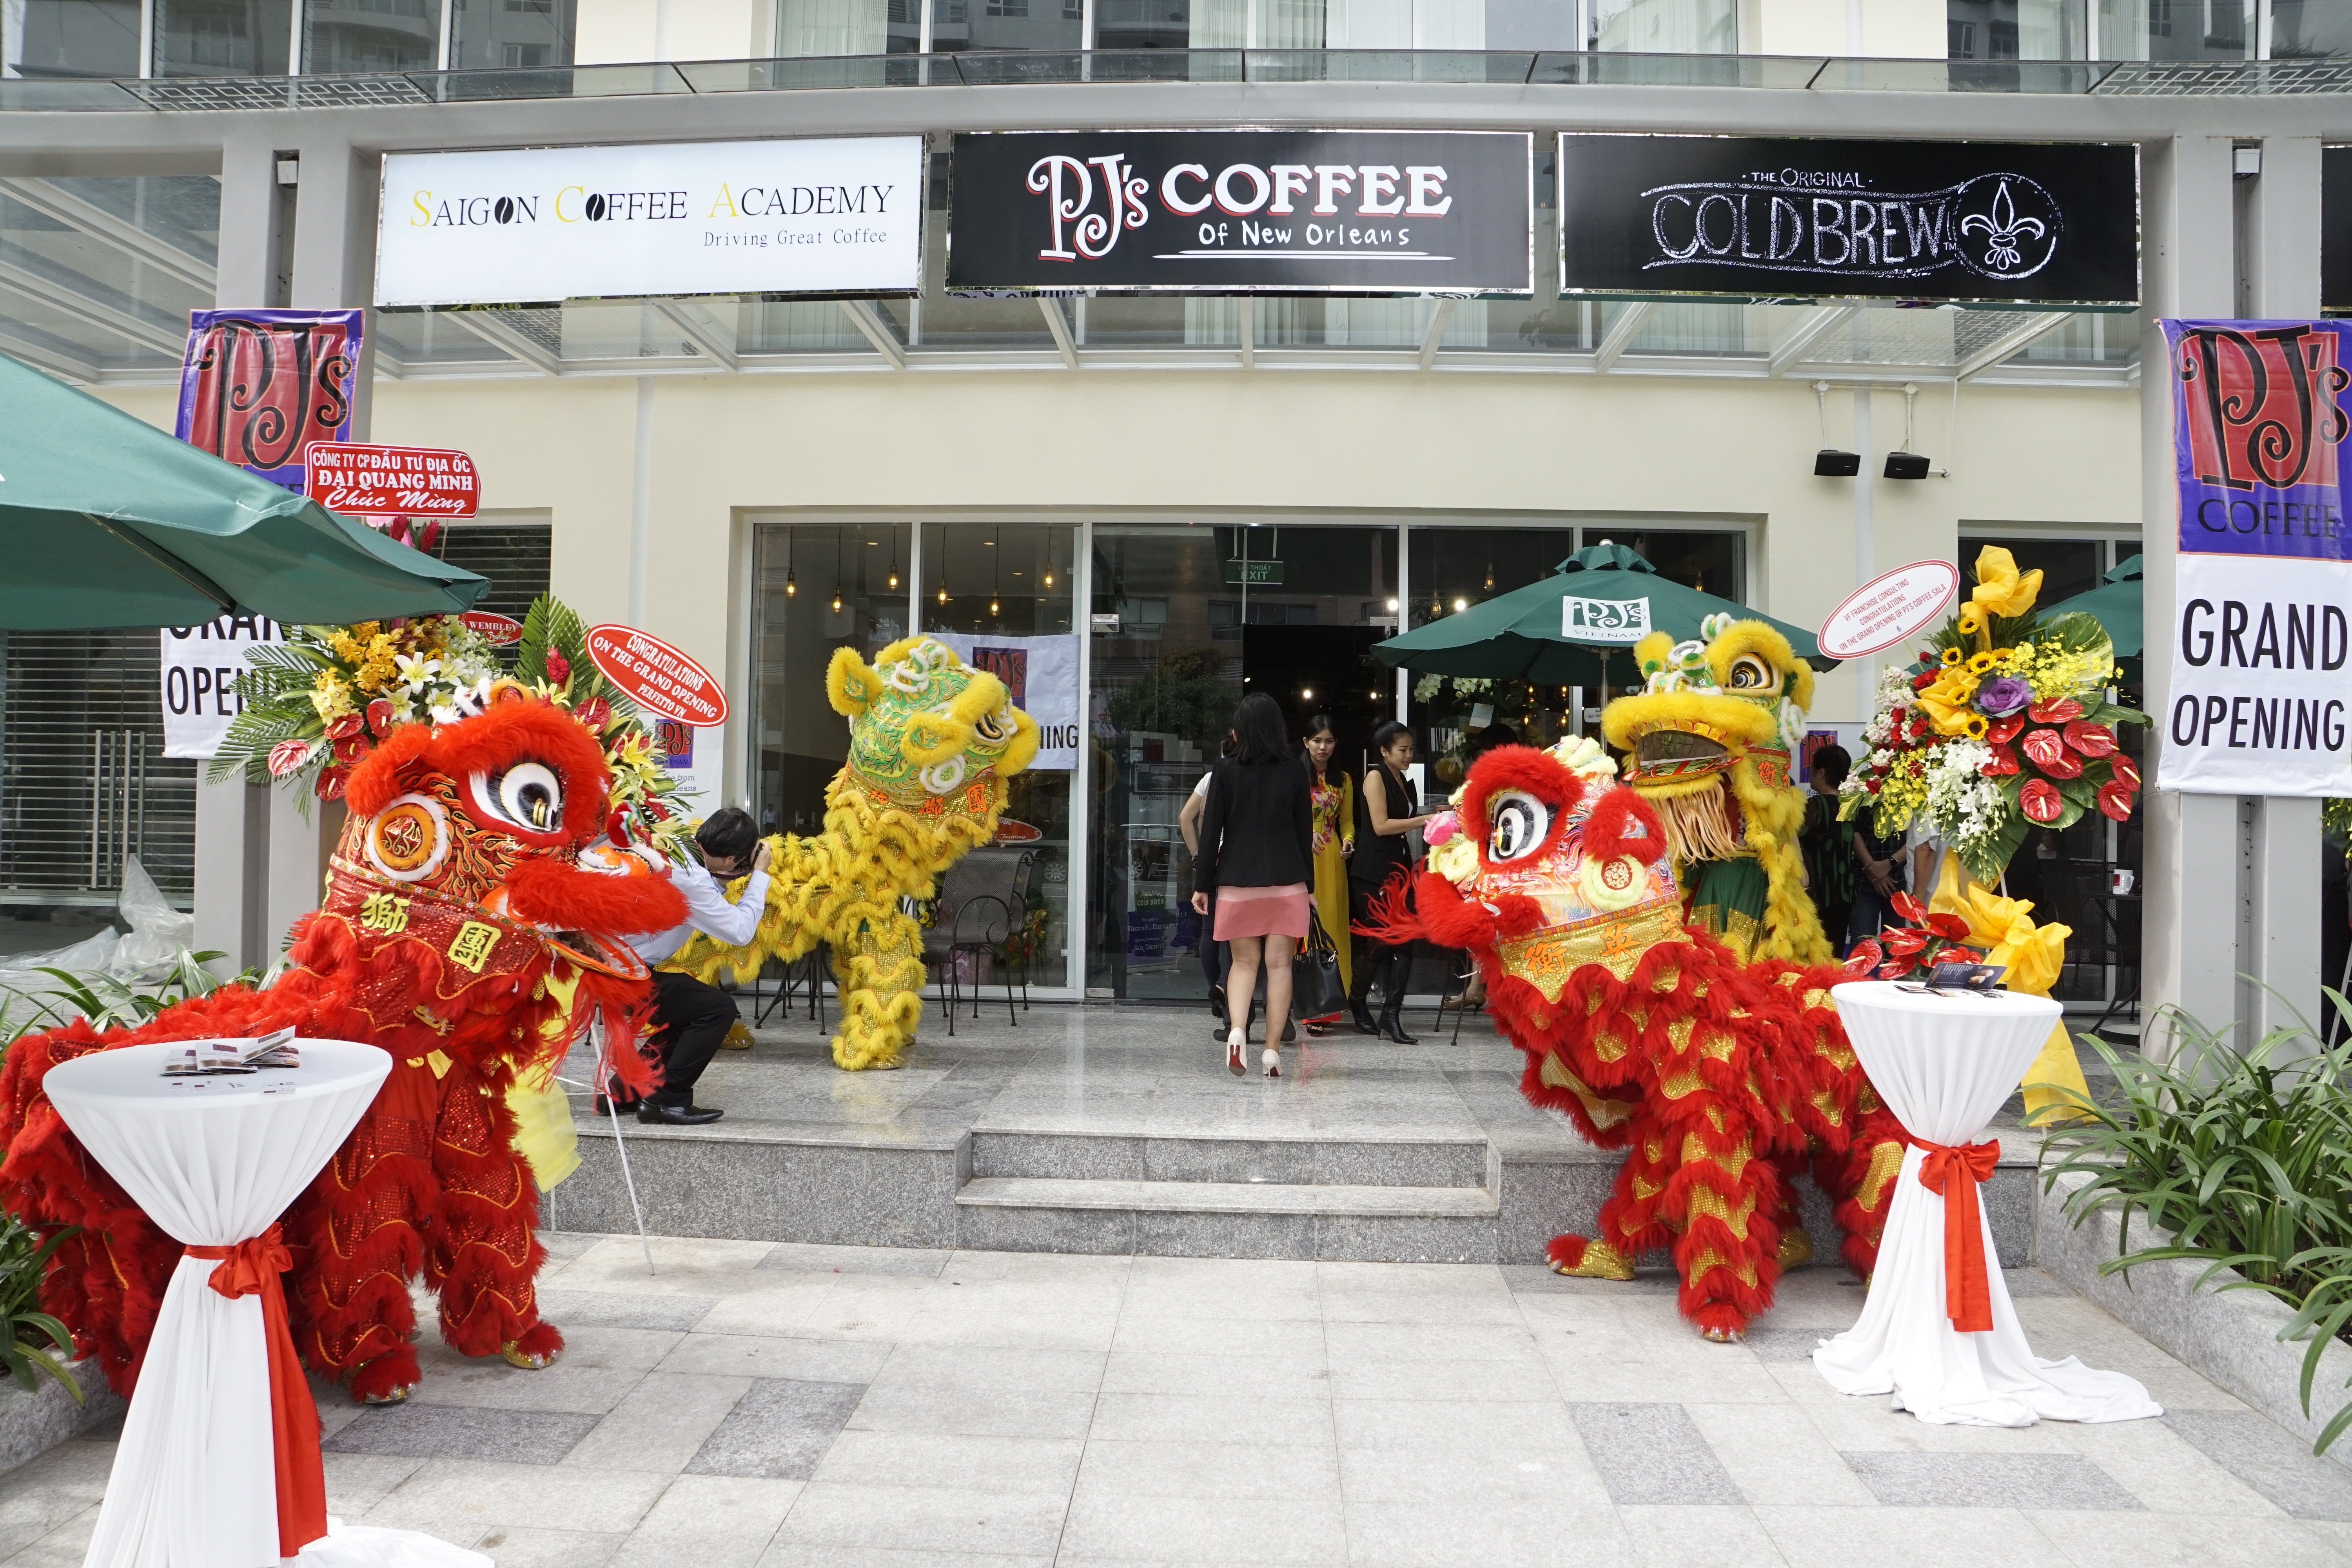 PJ’s Coffee From New Orleans Expands In Vietnam With The Opening Of Its Second Store